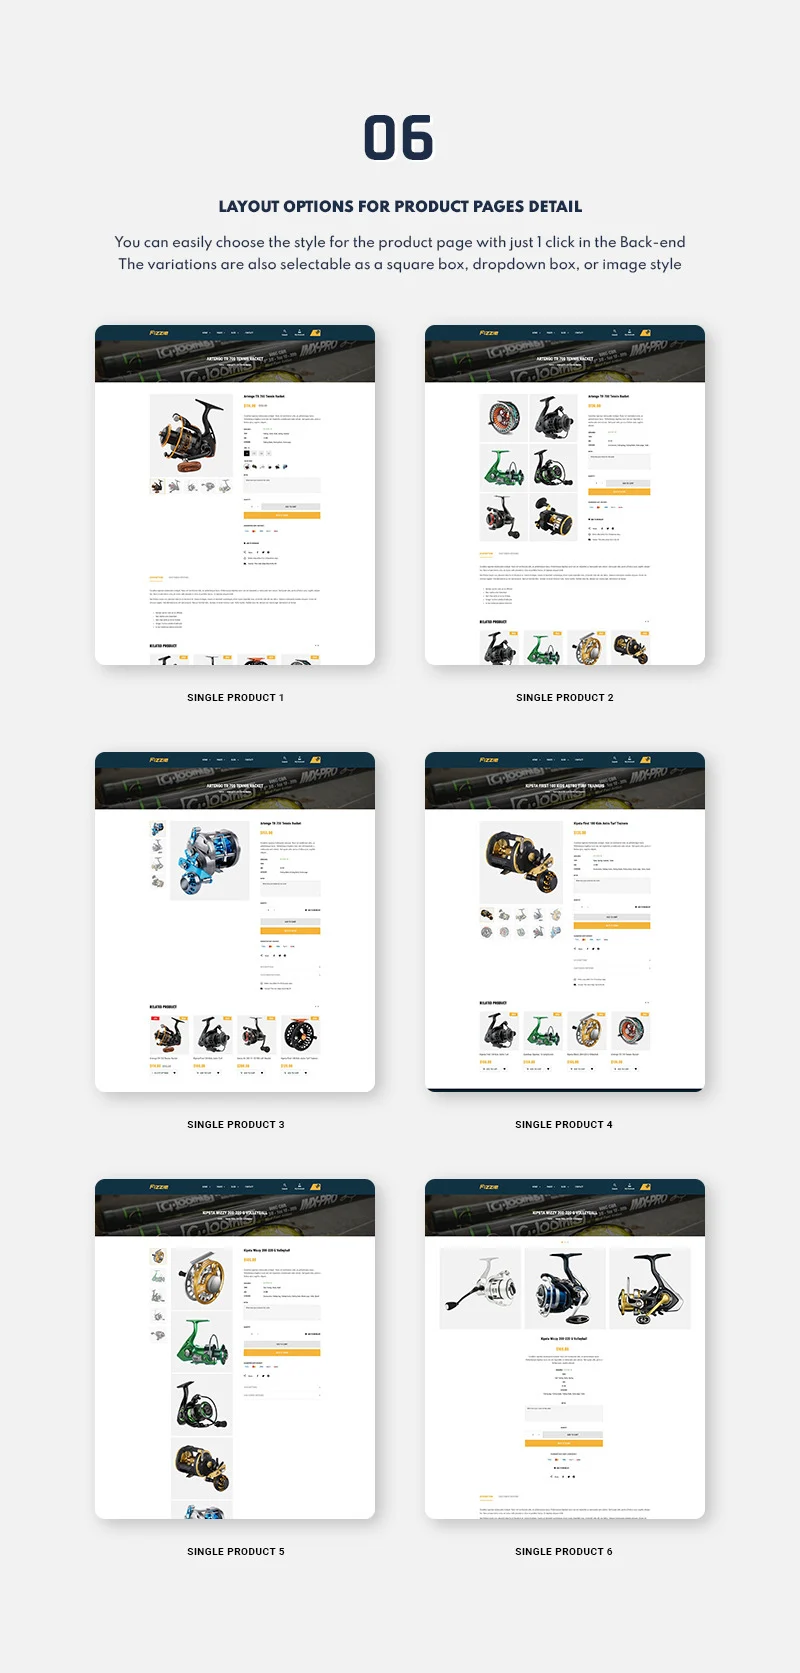 A set of 6 different layout options for product pages detail on a gray background.